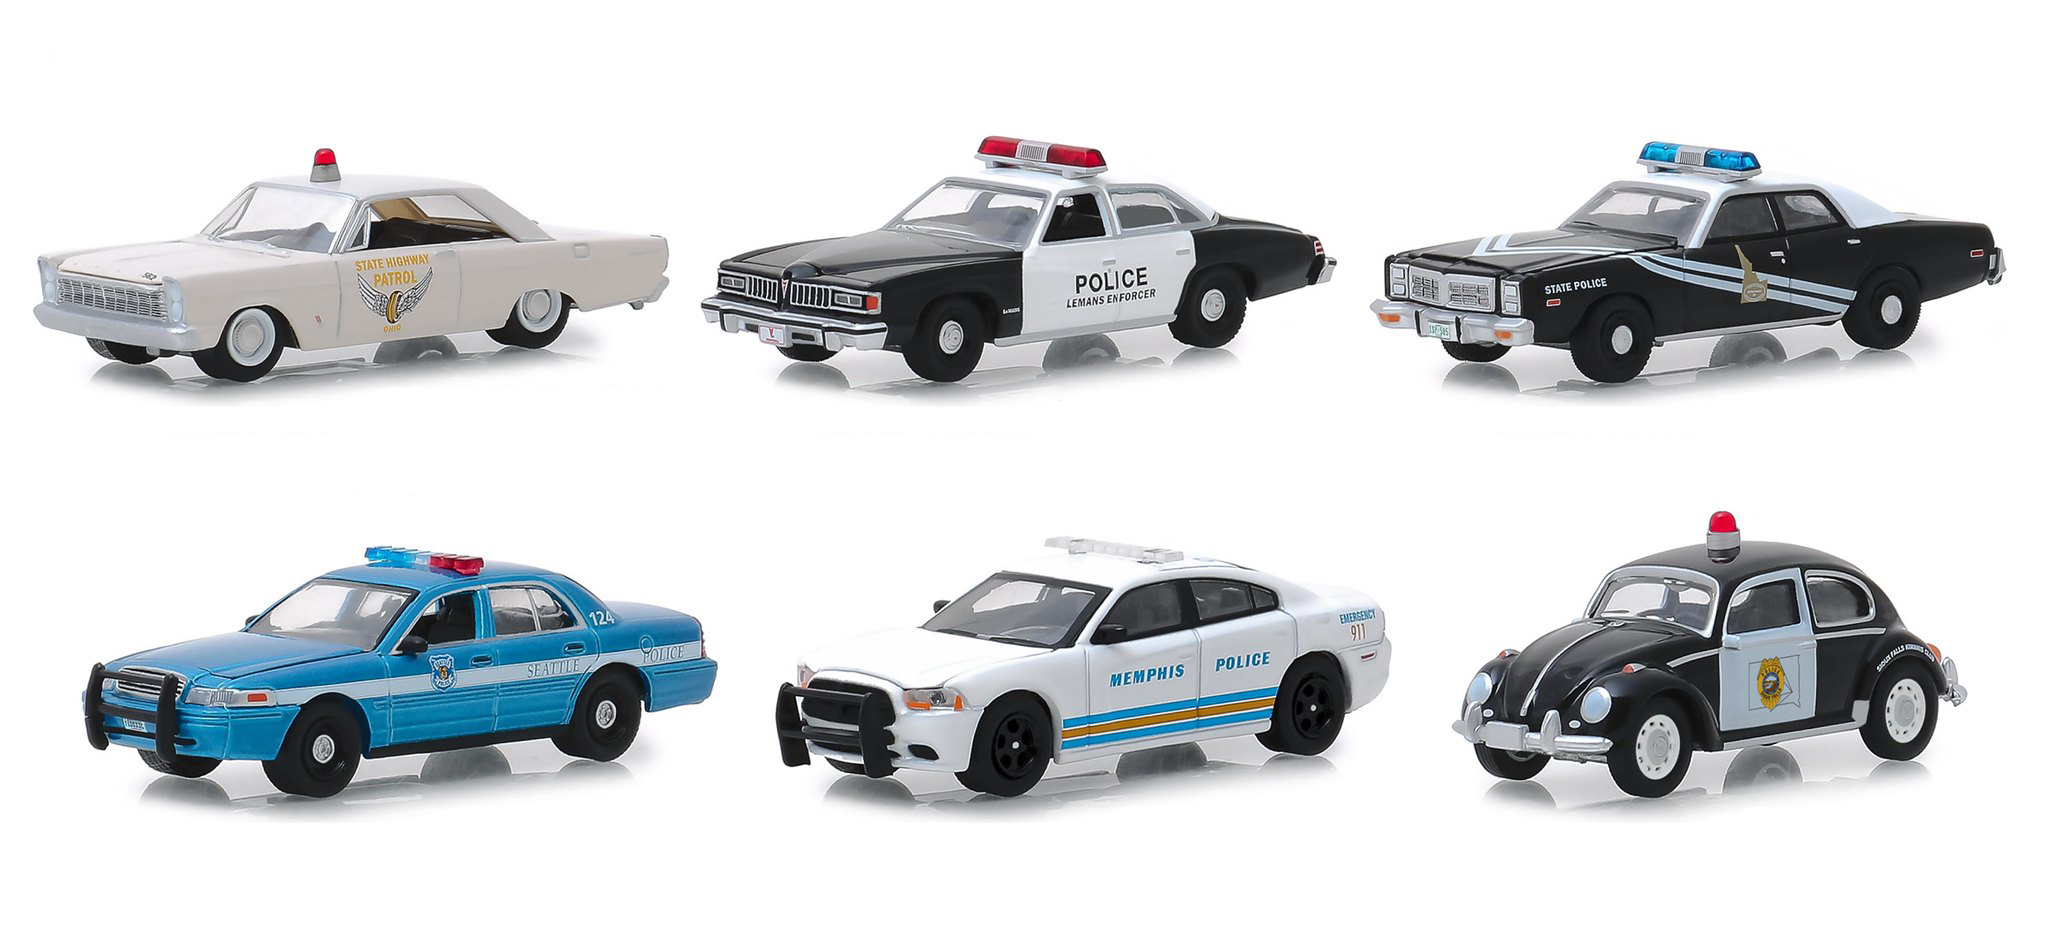 Hot_Pursuit_Series_31_Set_of_6_Police_Cars_164_Diecast_Models_by_Greenlight...